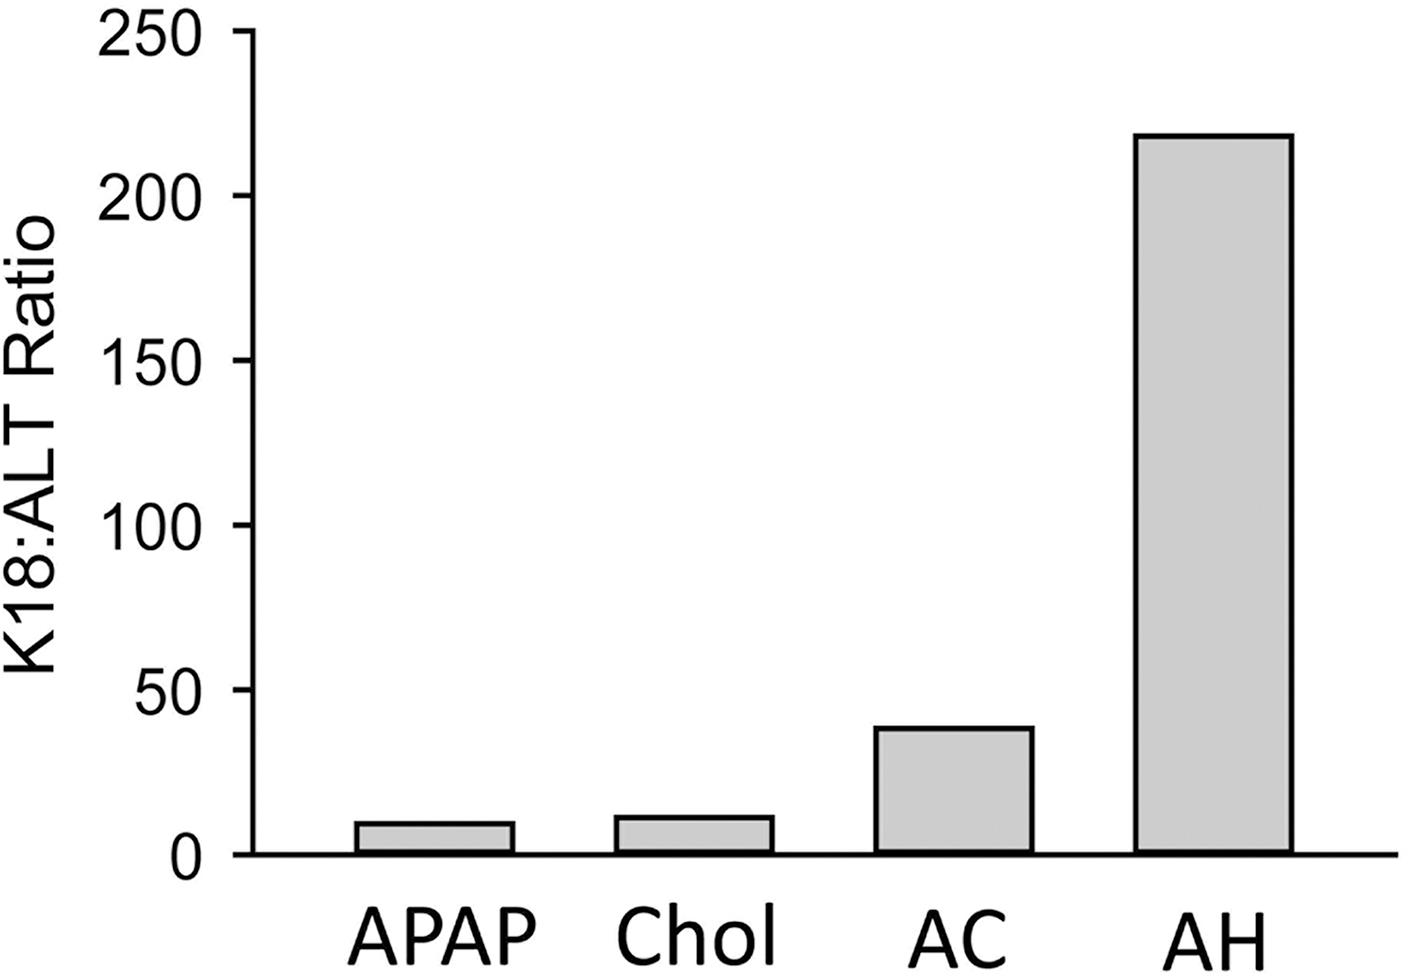 Ratio of K18 (M65) to plasma alanine aminotransferase (ALT) activity compiled from multiple studies.